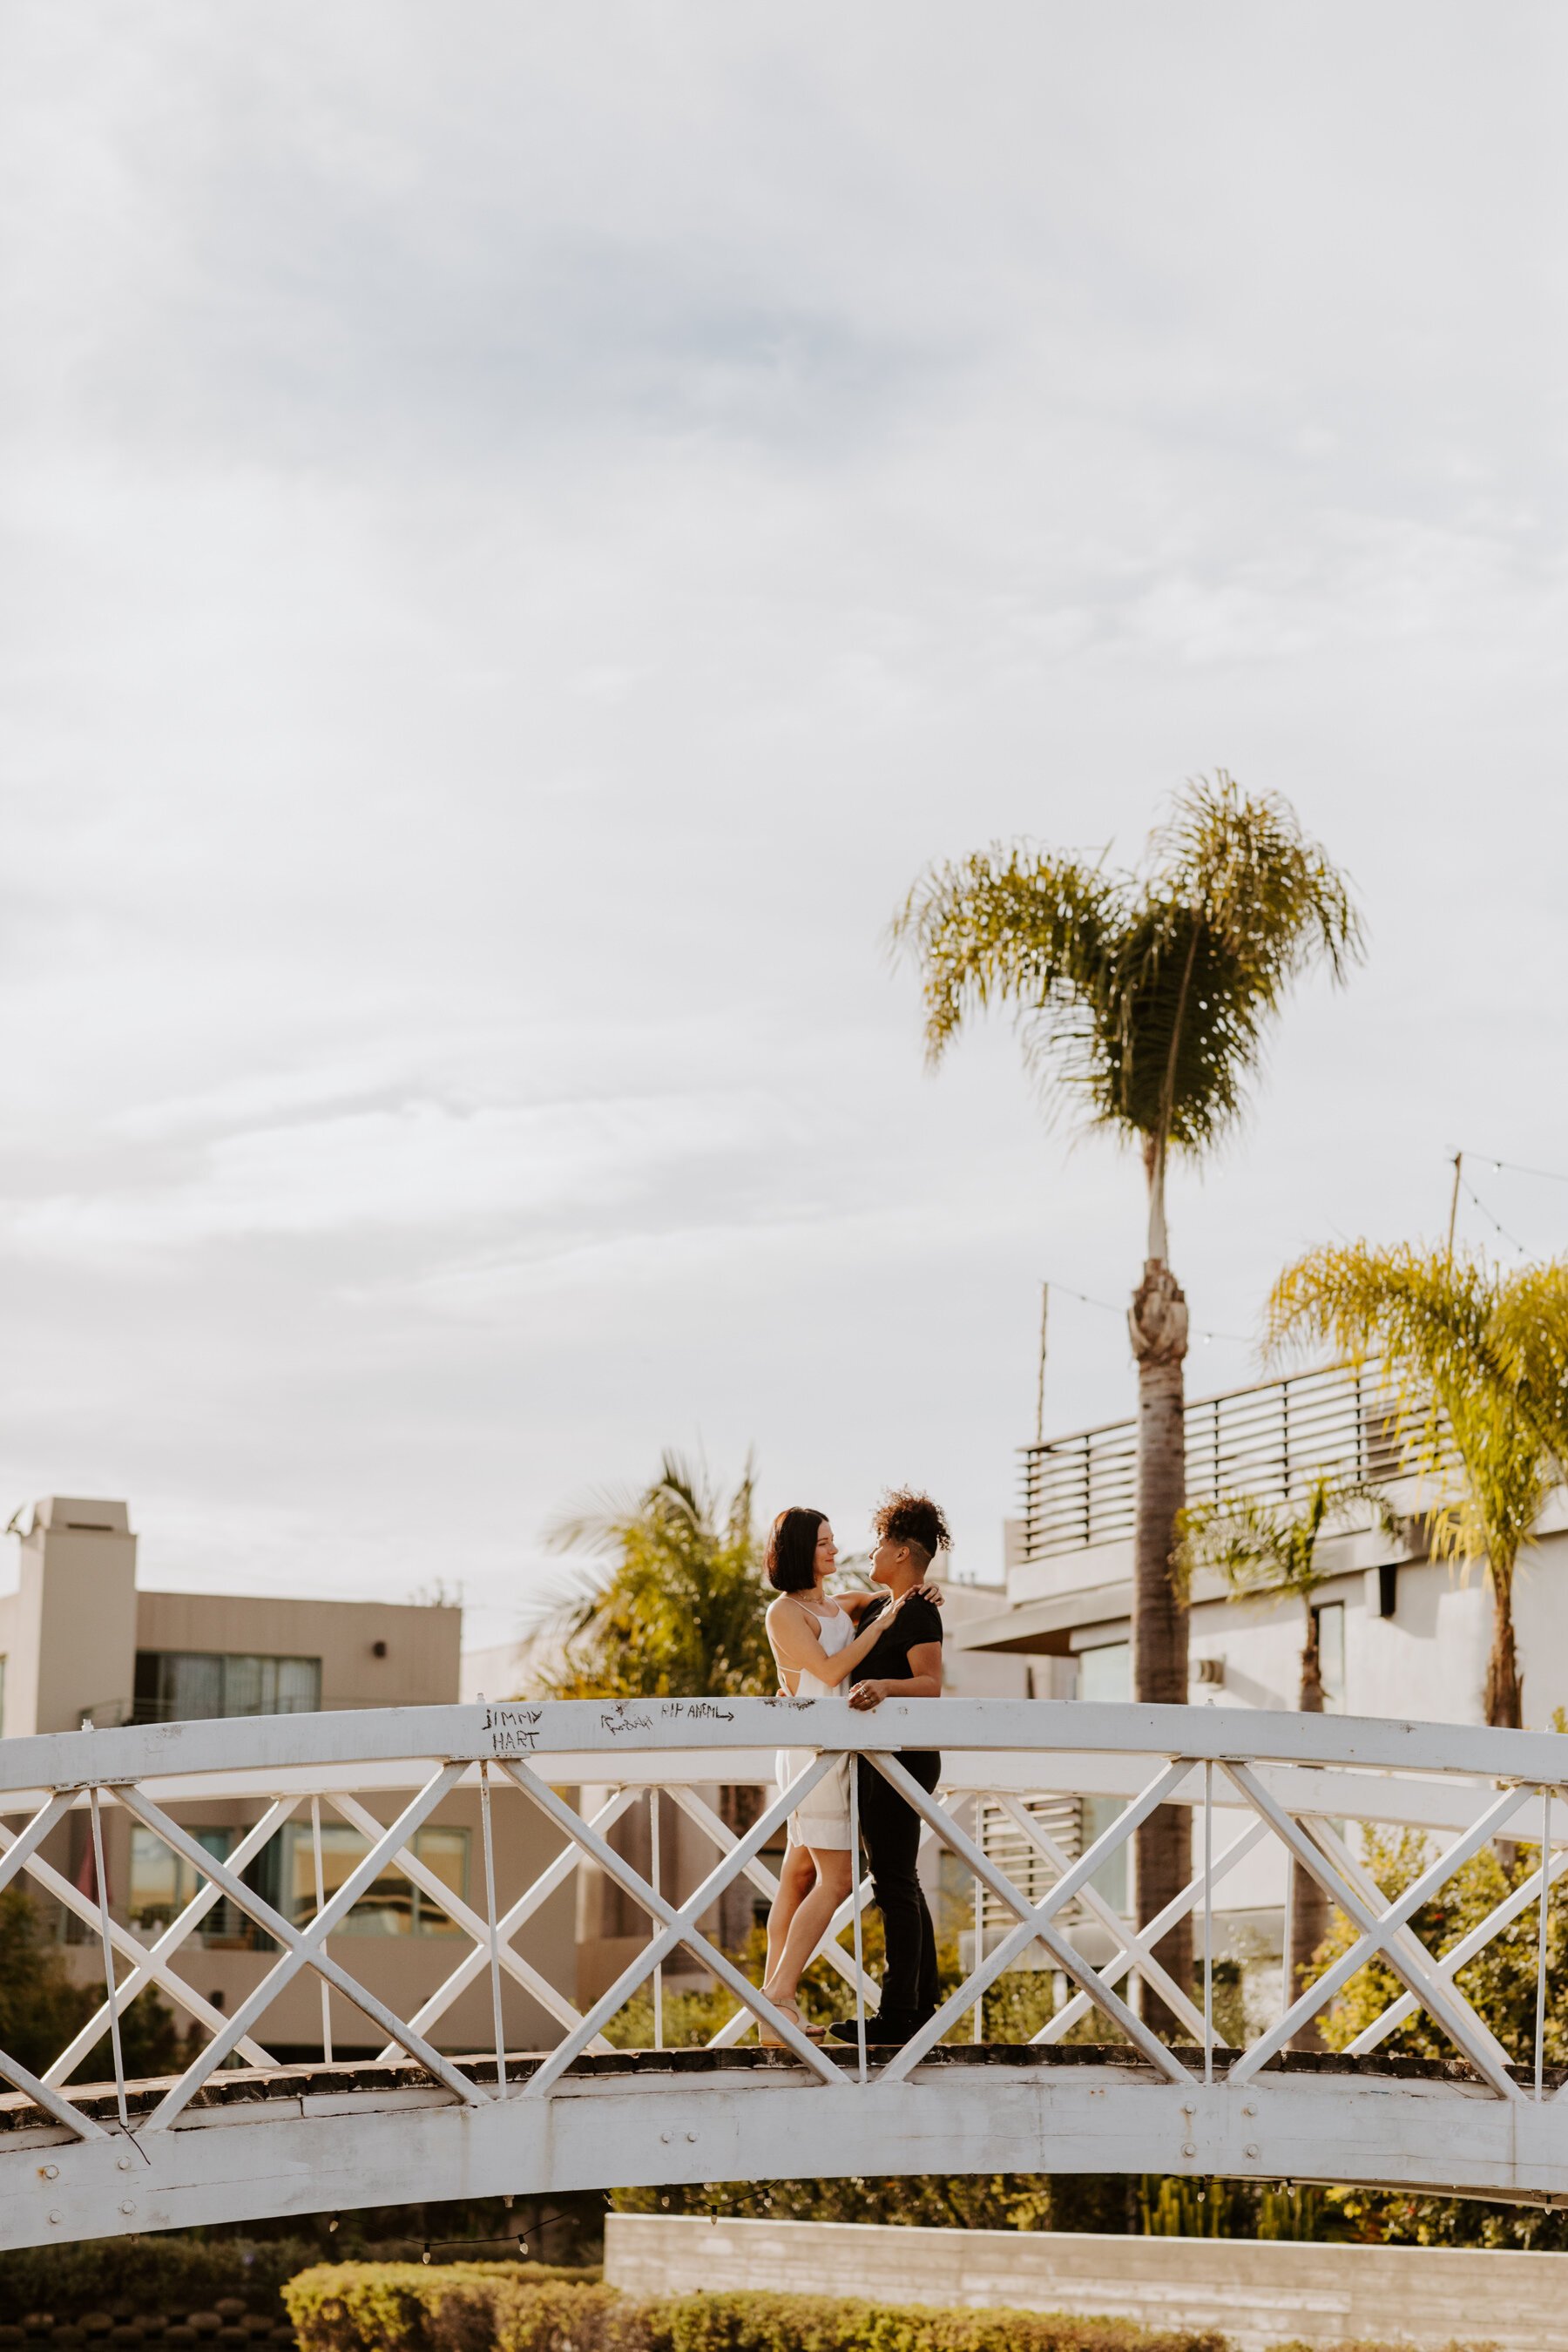 Venice Canals engagement session with lesbian couple on bridge, photography by LGTBQ friendly photographer Tida Svy